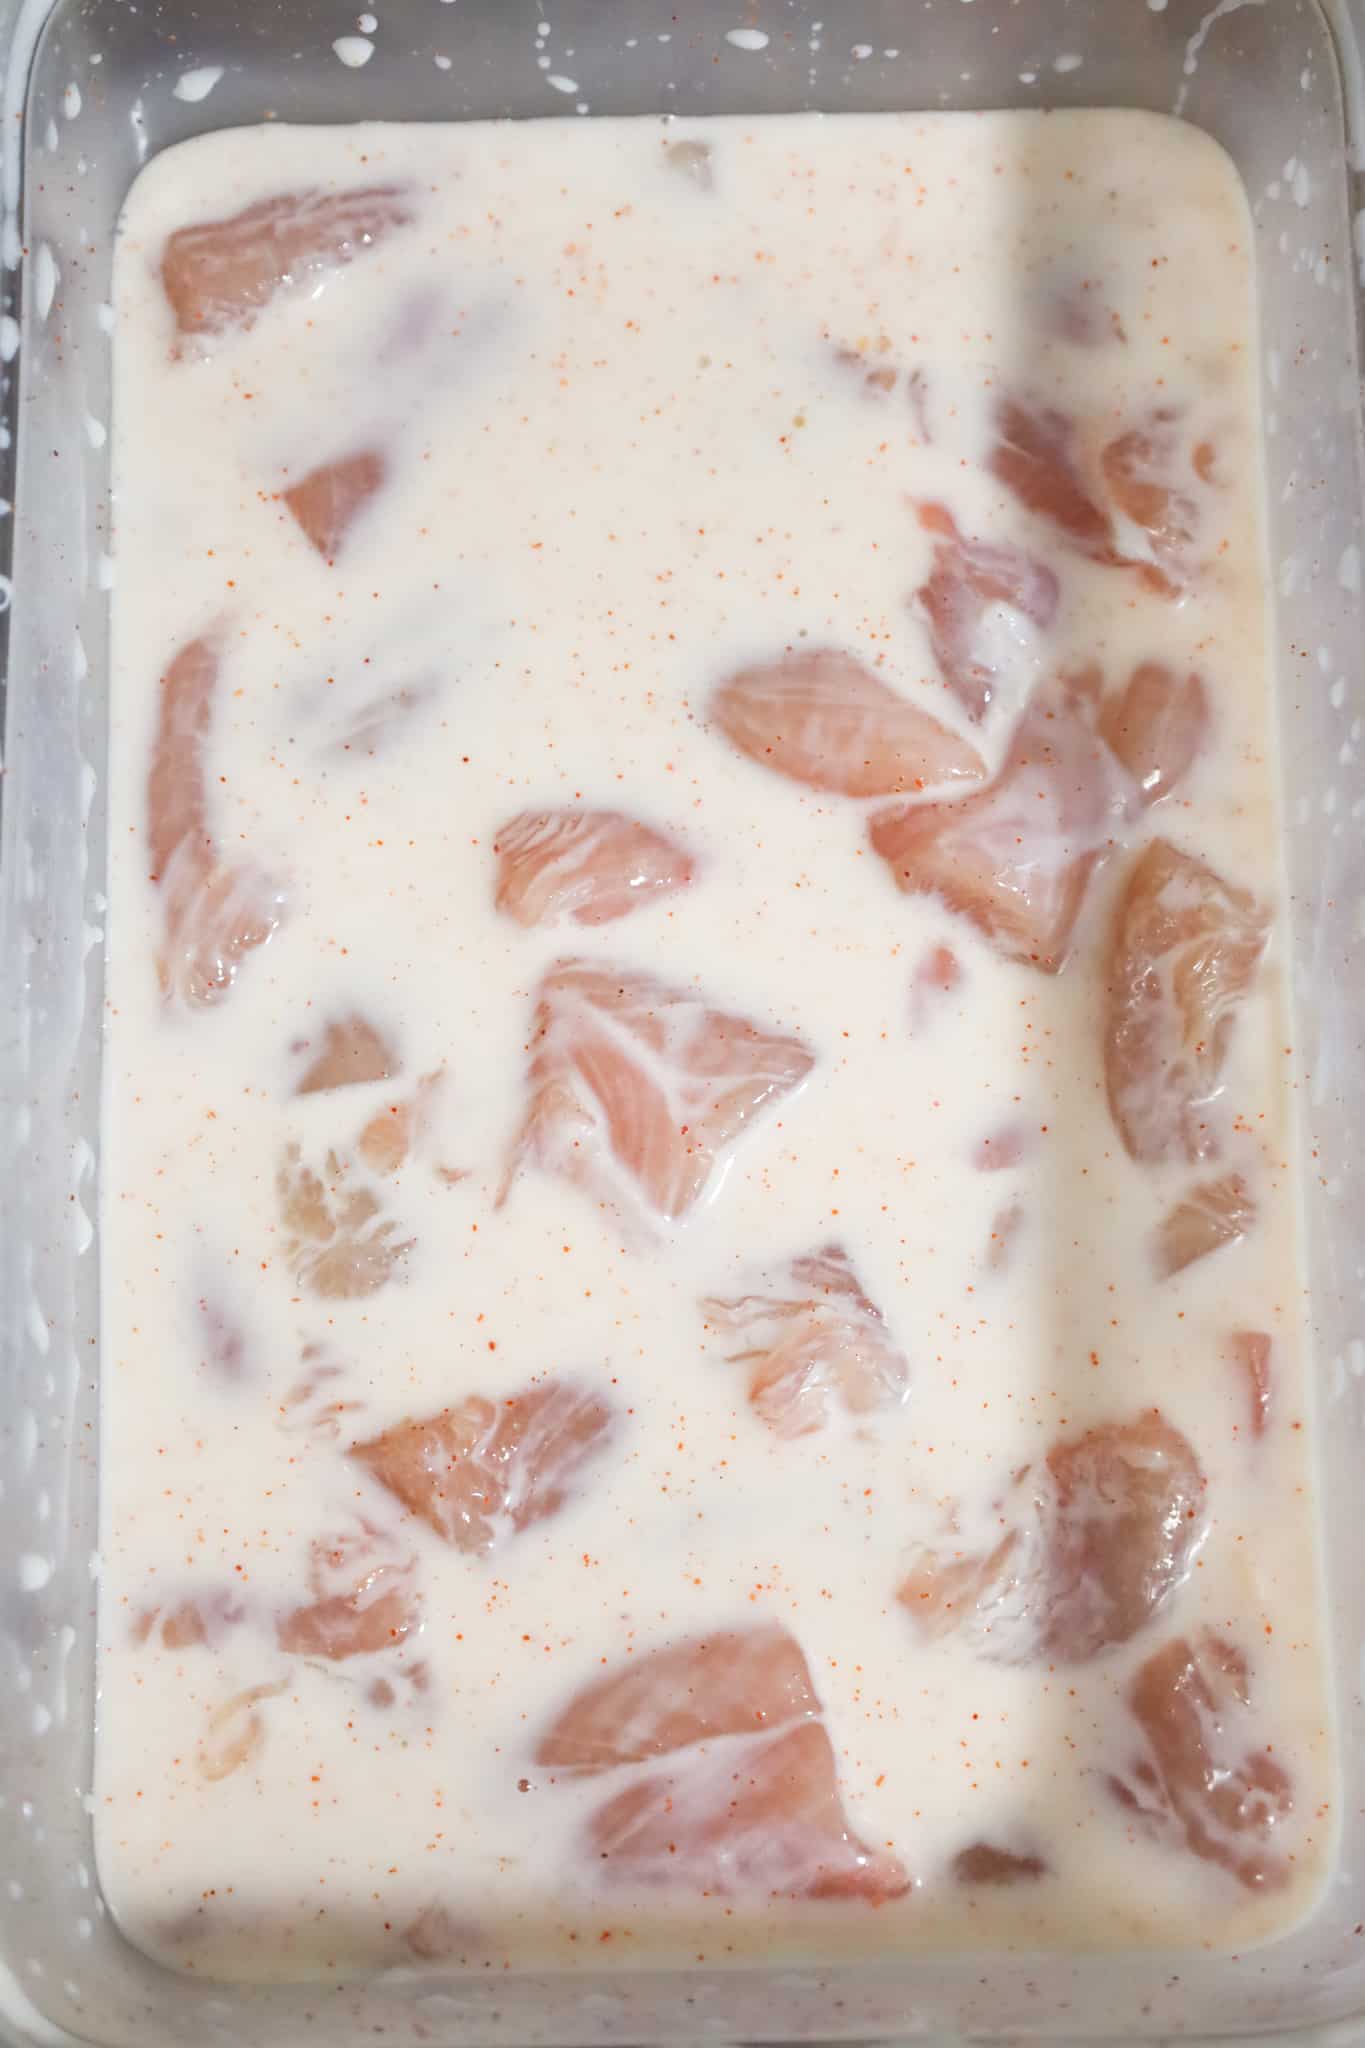 raw chicken breast chunks soaking in buttermilk and spice mixture